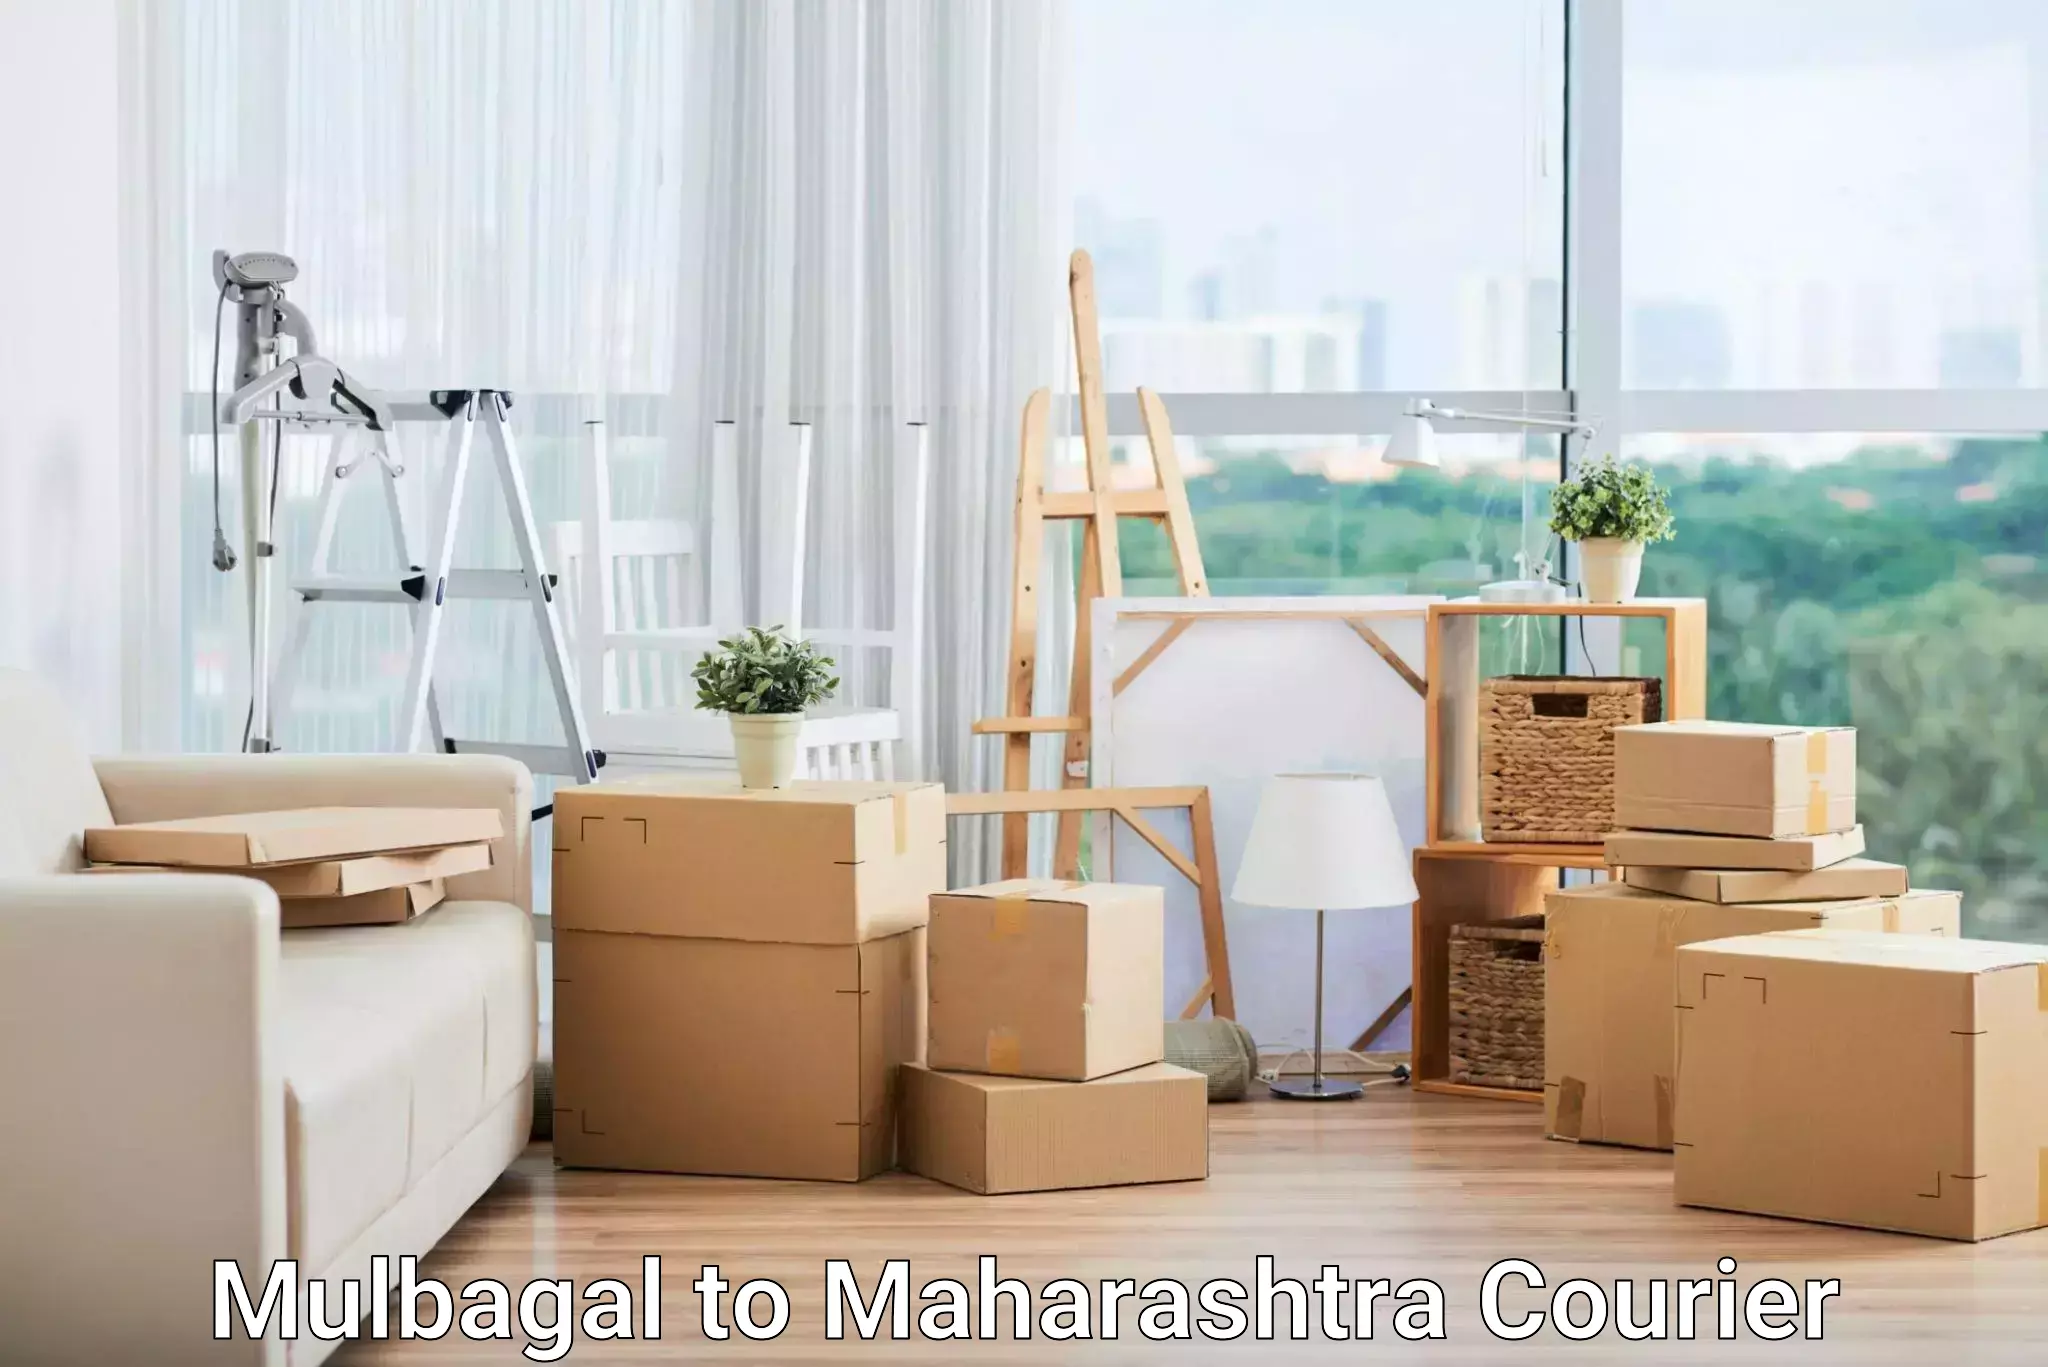 Reliable delivery network in Mulbagal to Maharashtra